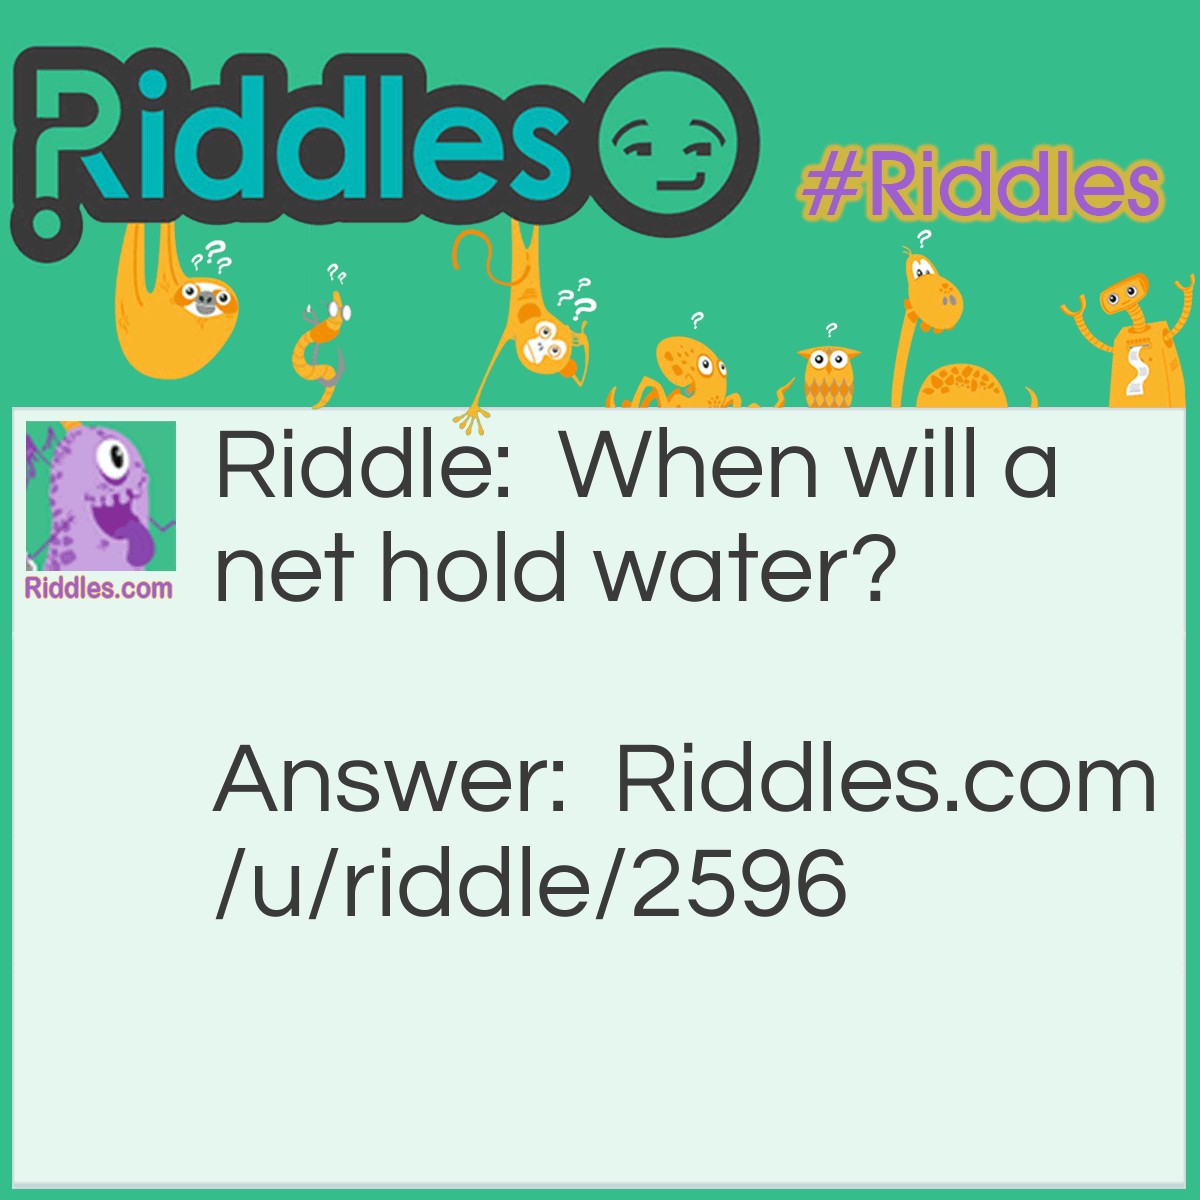 Riddle: When will a net hold water? Answer: When it is frozen.